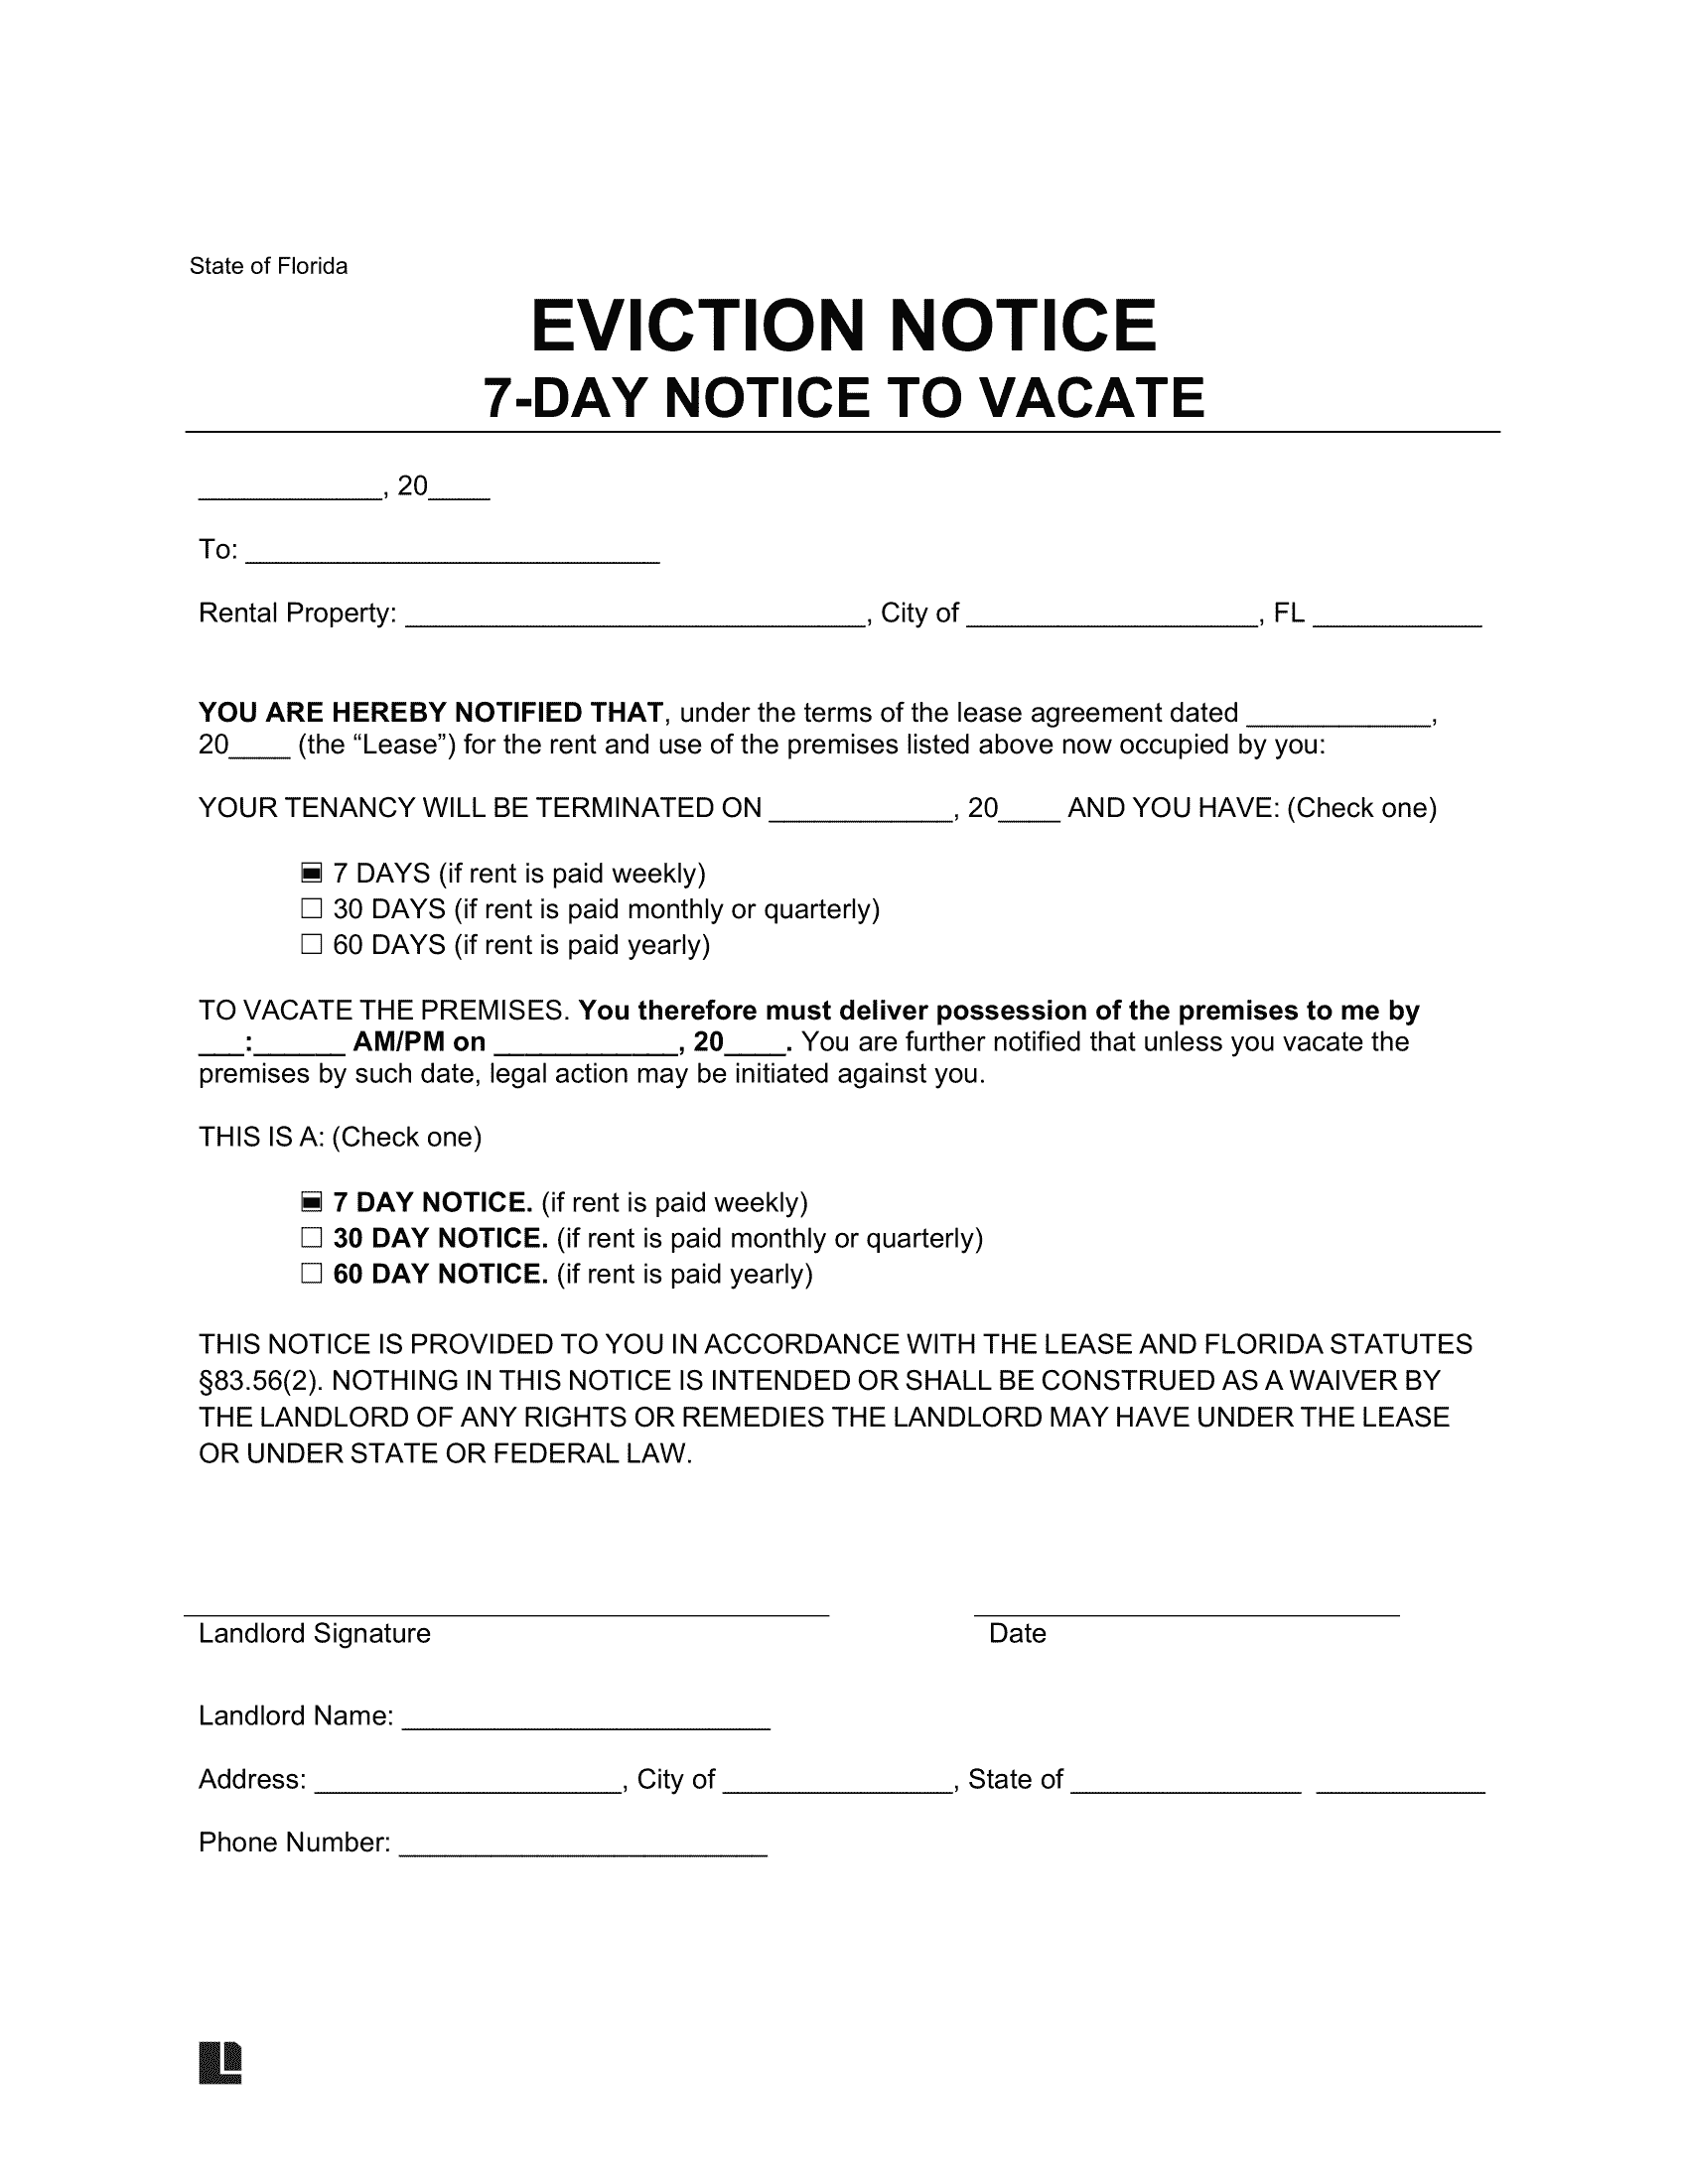 Florida 7 Day Notice to Vacate